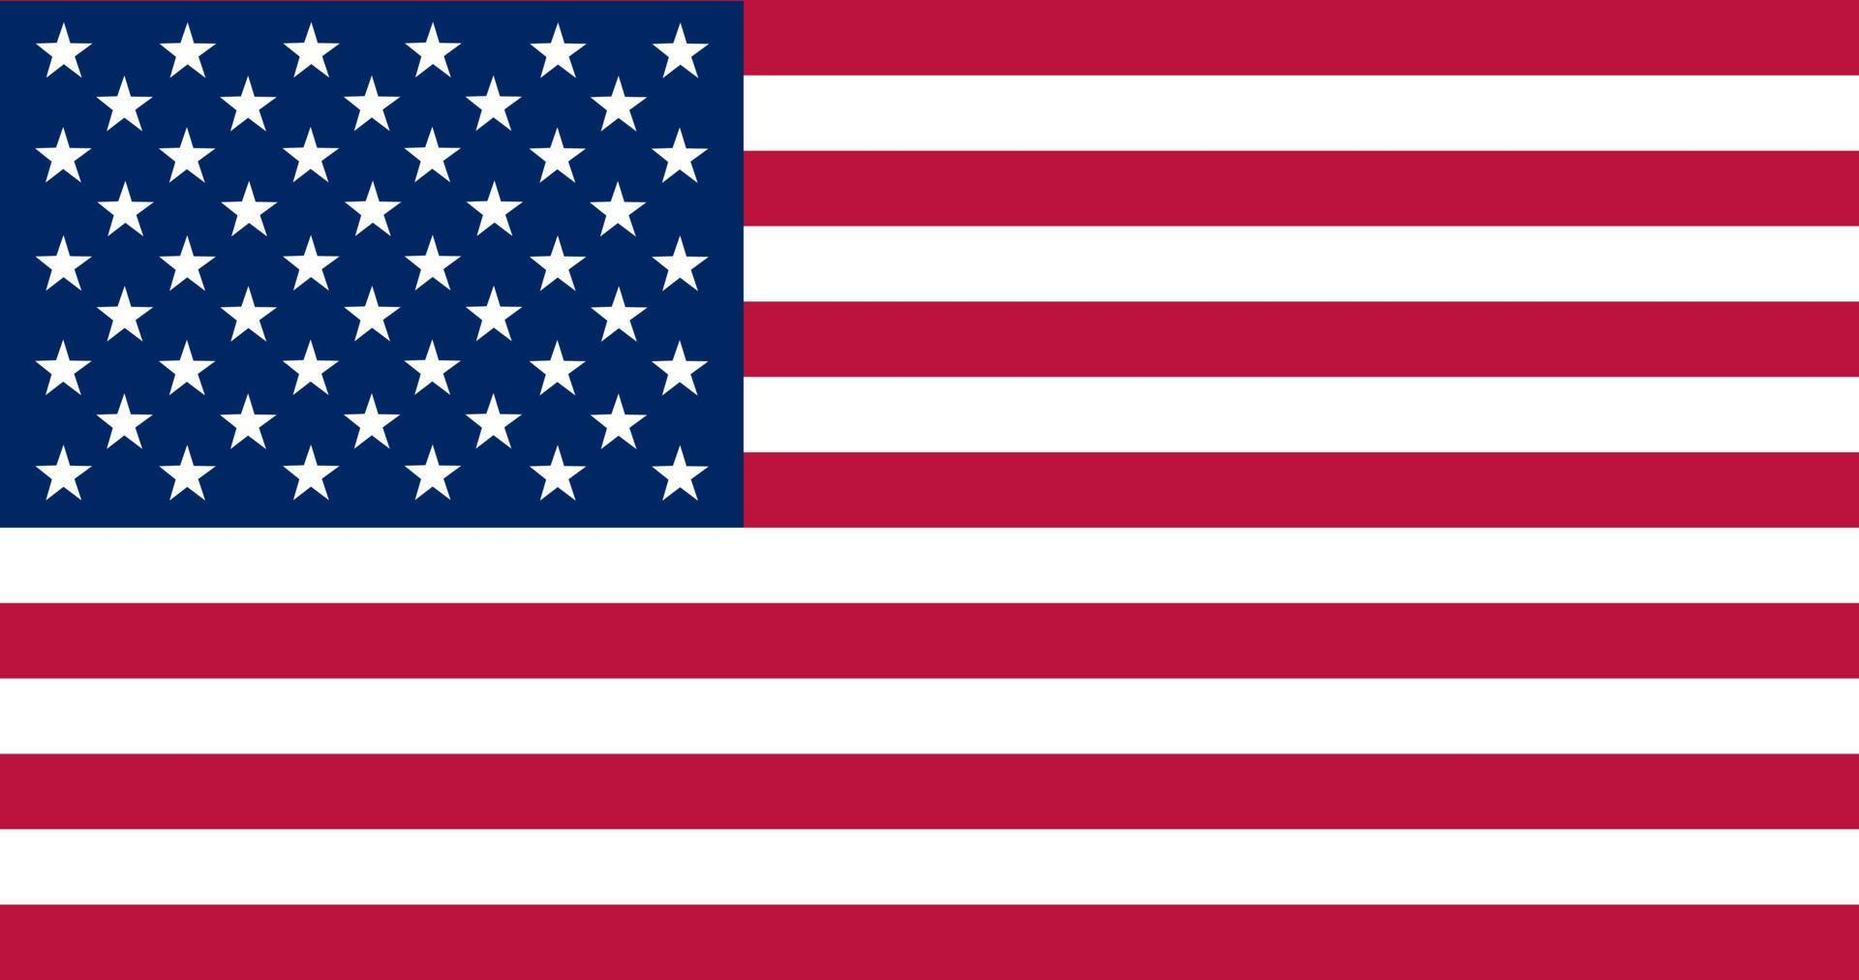 American flag, USA, vector graphics. Copy space. Vector illustration